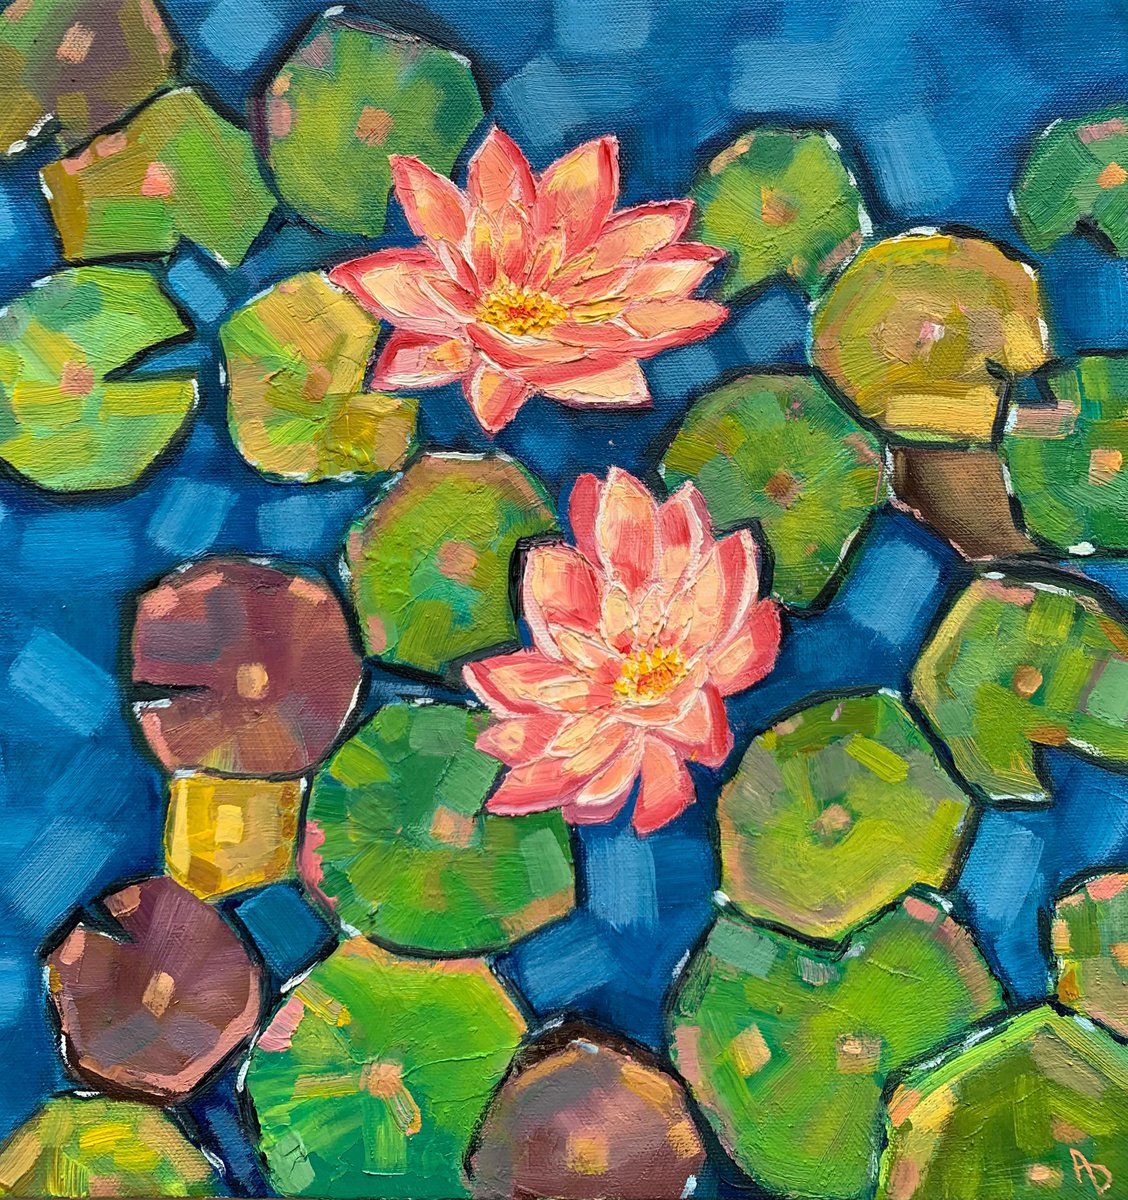 2 Water lilies by Amita Dand